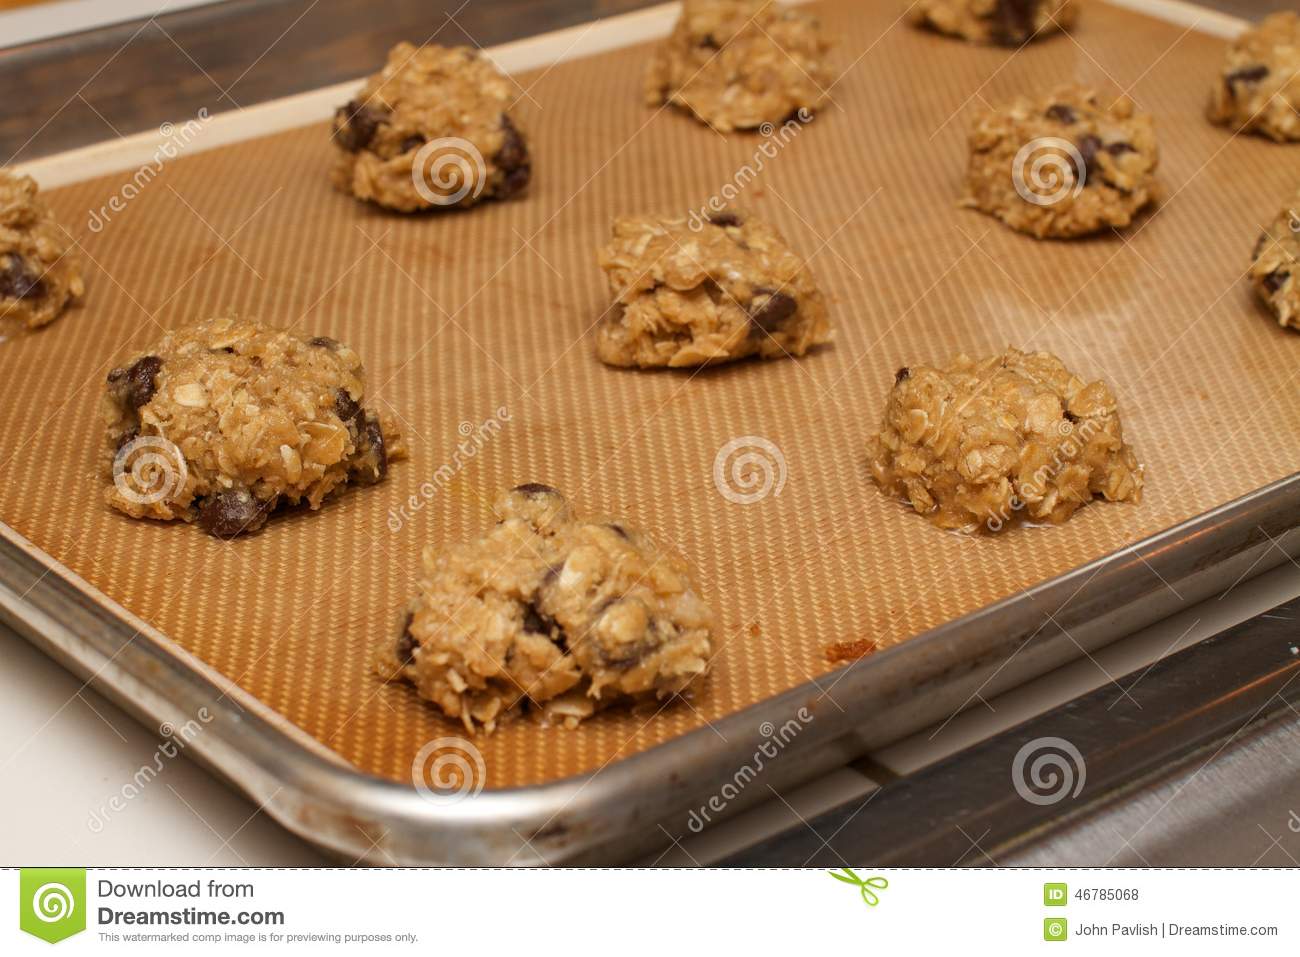 Preparation For Fresh Homemade Chocolate Chip Oatmeal Cookie Dough    